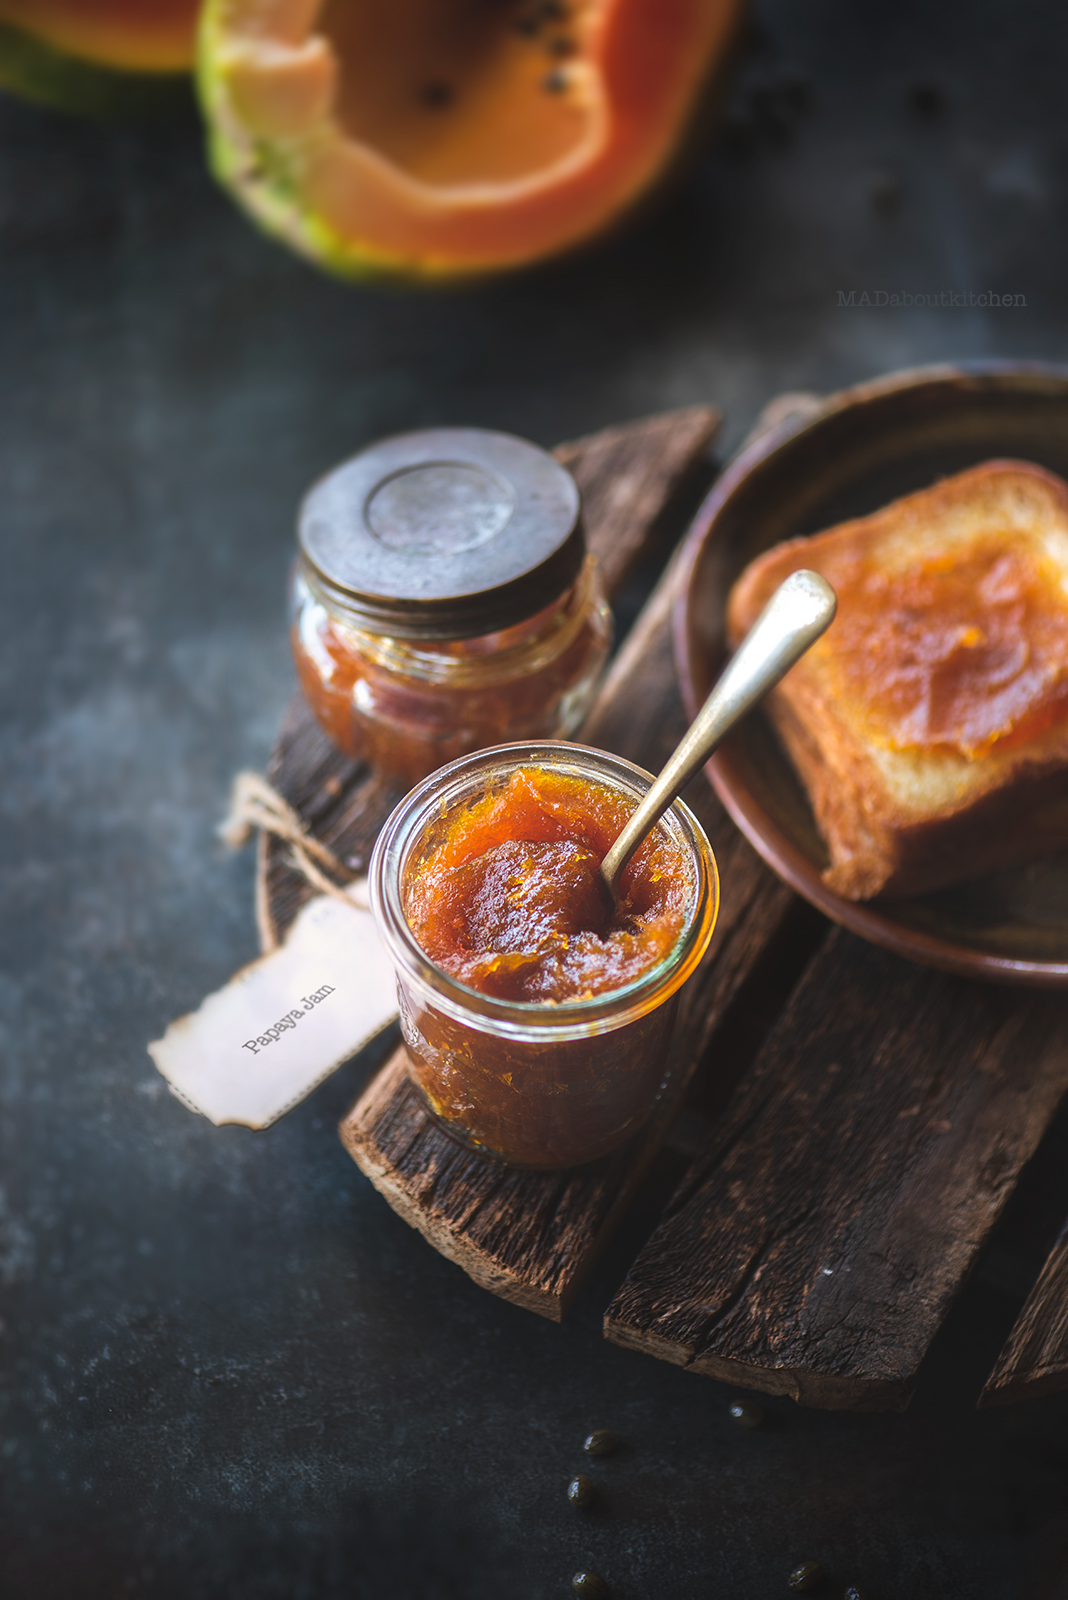 Papaya jam has a typical smell and is absolutely appetising . Caramelised, thick and perfect textured jam is super easy to make too.